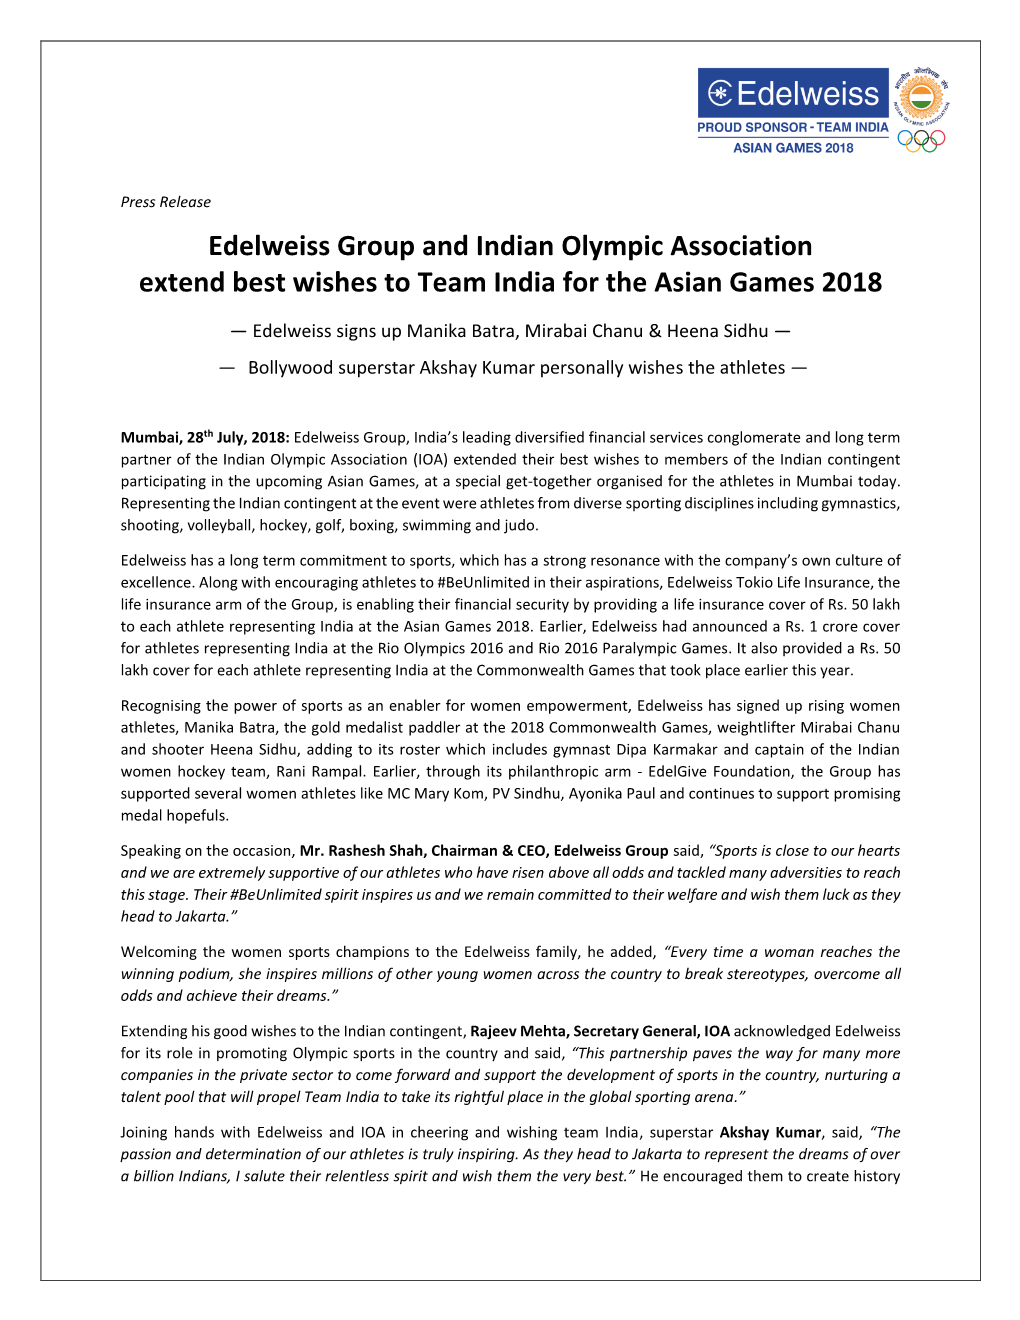 Edelweiss Group and Indian Olympic Association Extend Best Wishes to Team India for the Asian Games 2018